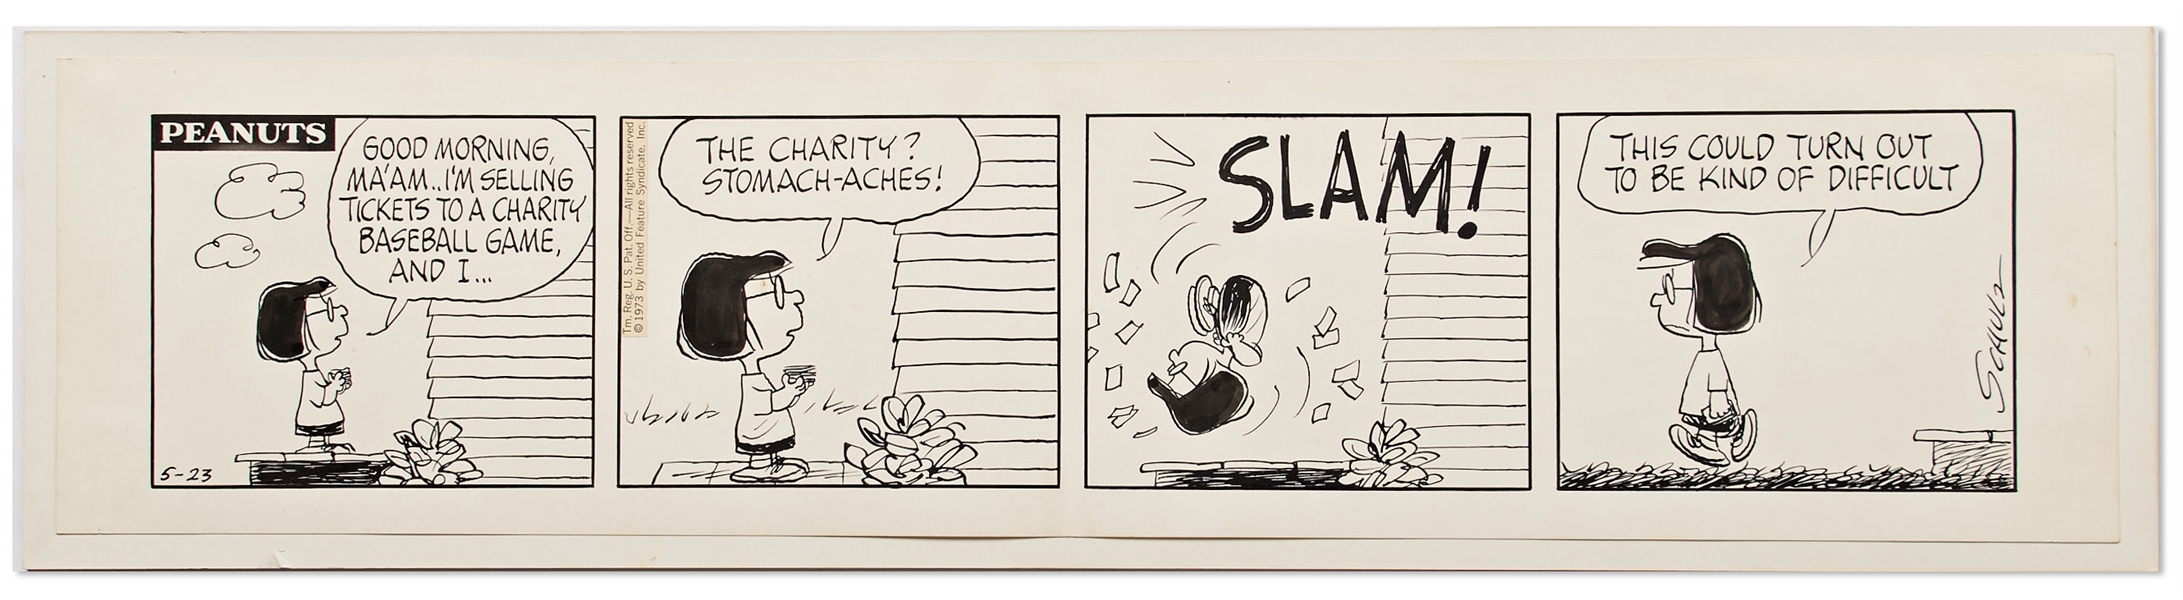 Original ''Peanuts'' Comic Strip Hand-Drawn by Charles Schulz -- Marcie Tries to Sell Tickets to a Charity Baseball Game